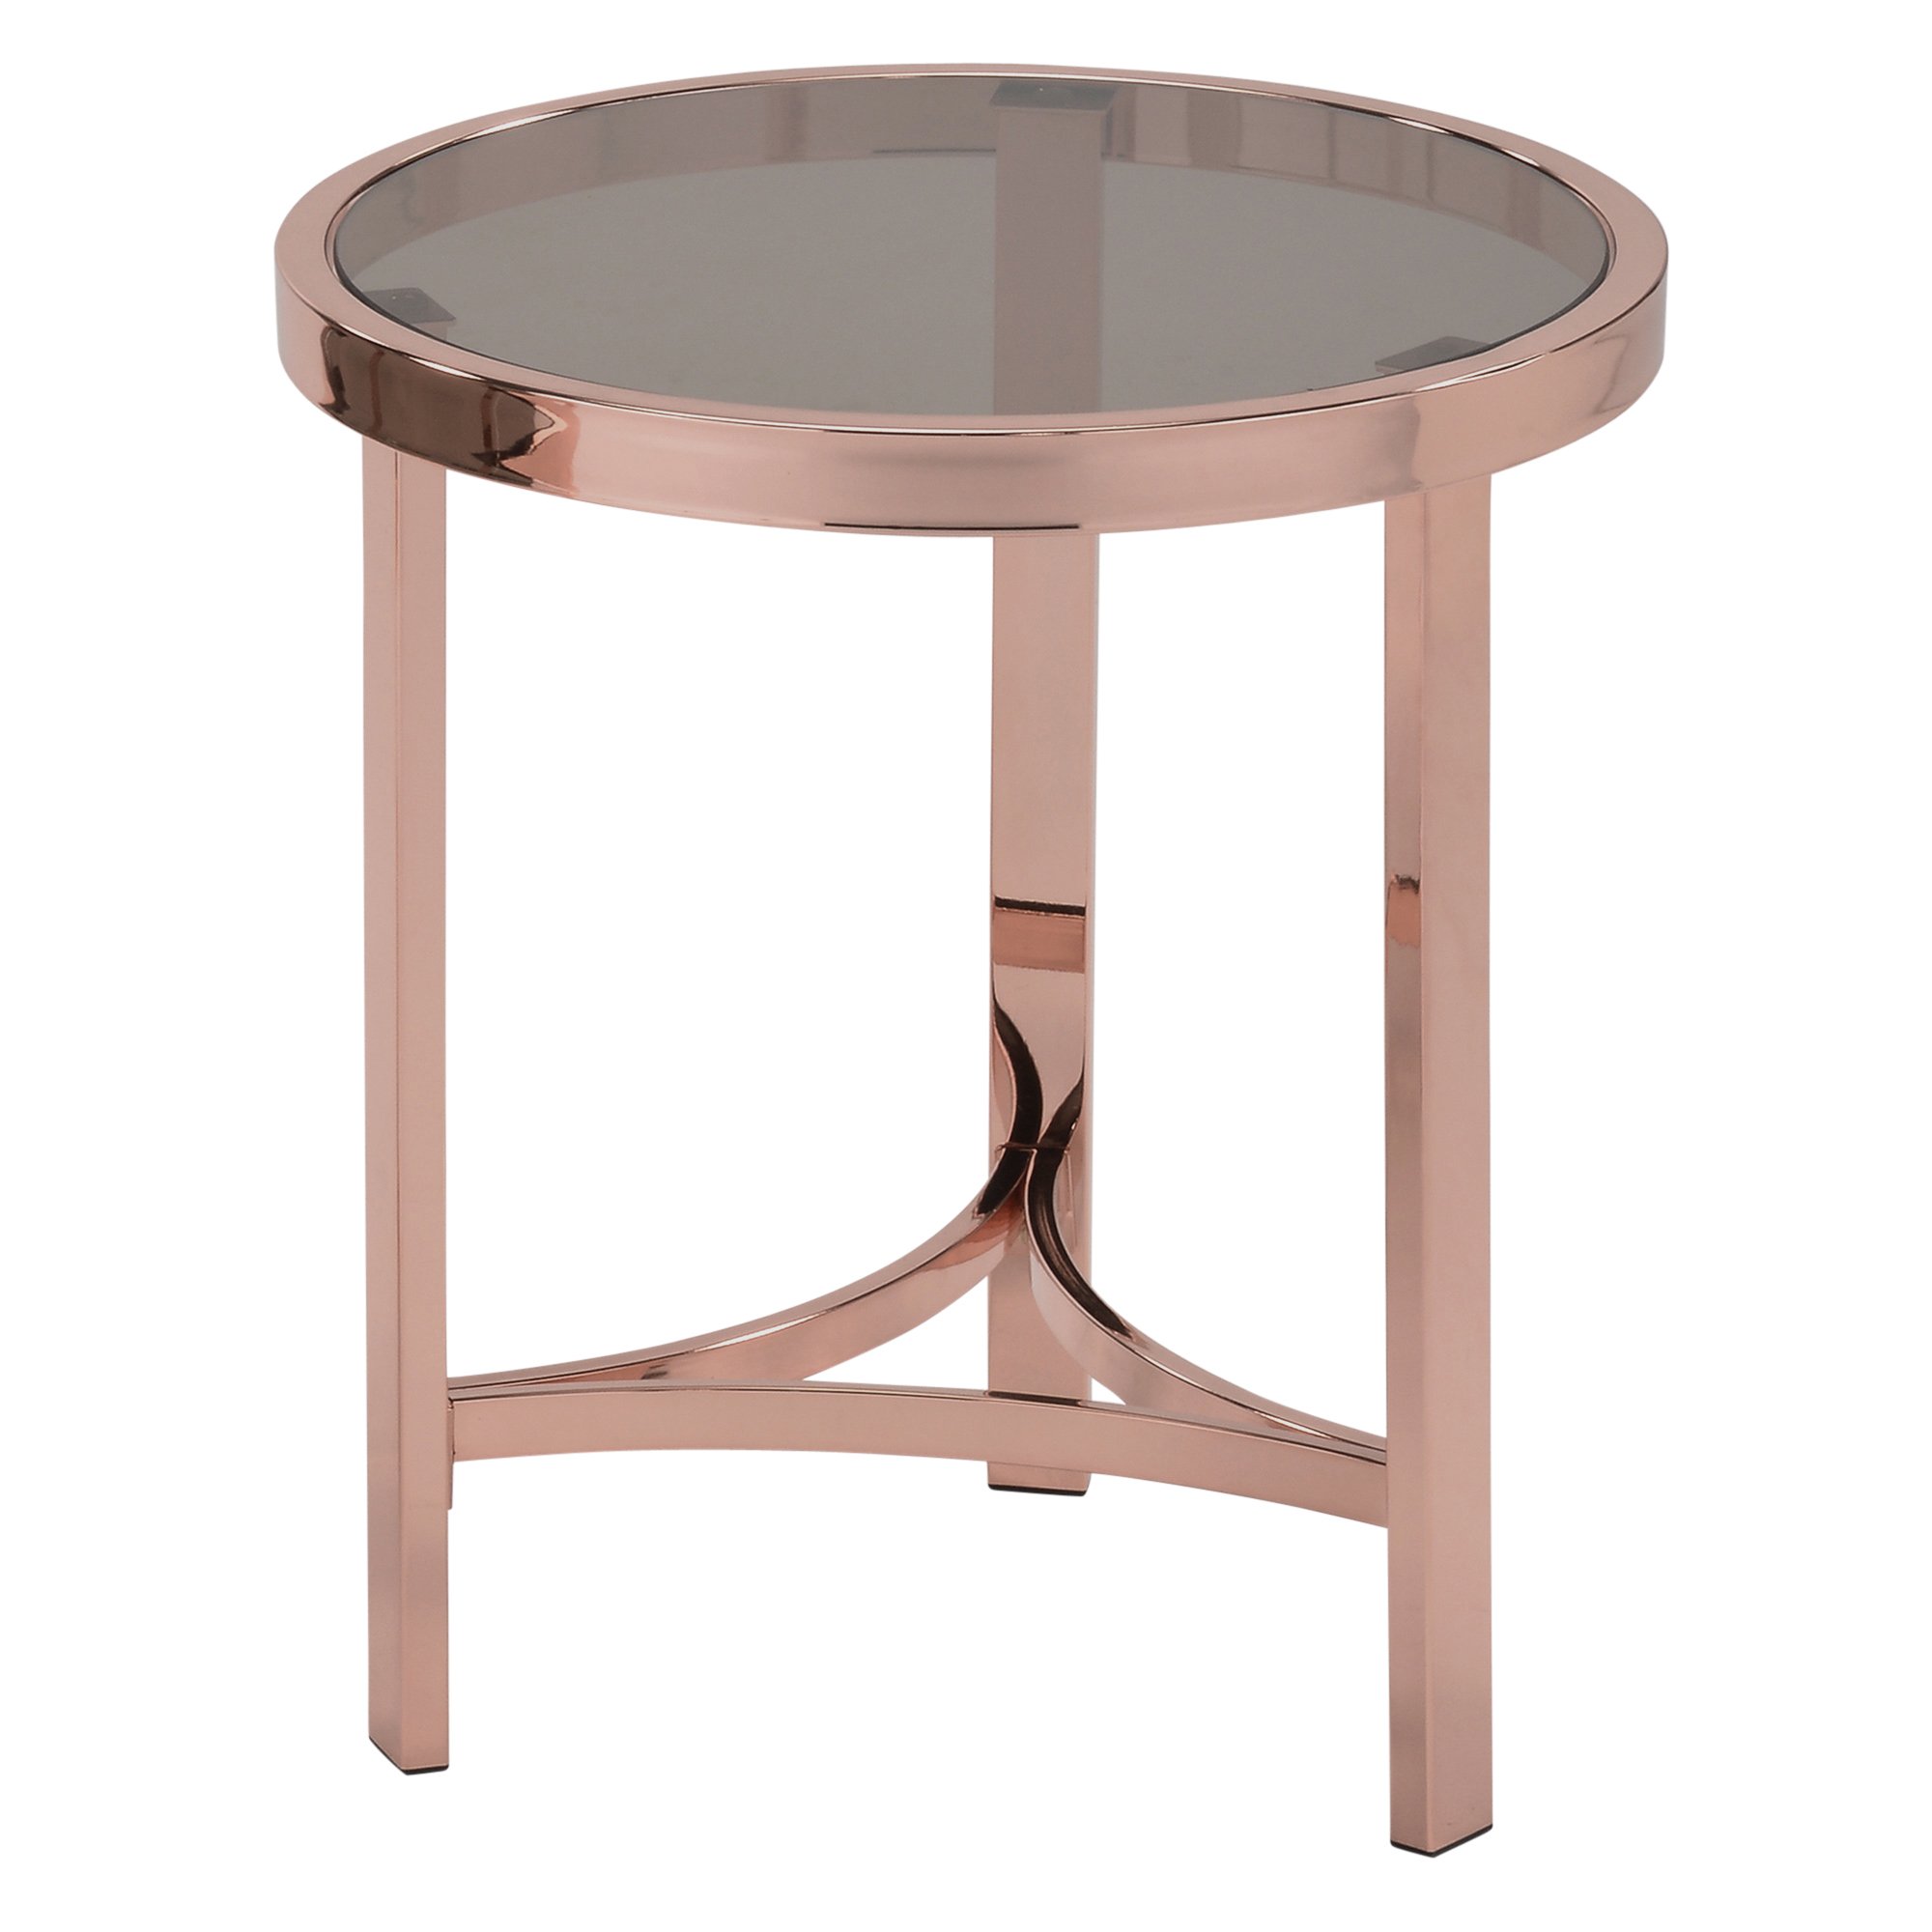 strata rose gold metal and smoked glass round accent table free shipping today small occasional side tables wood coffee set lamps that run batteries hallway console gray white